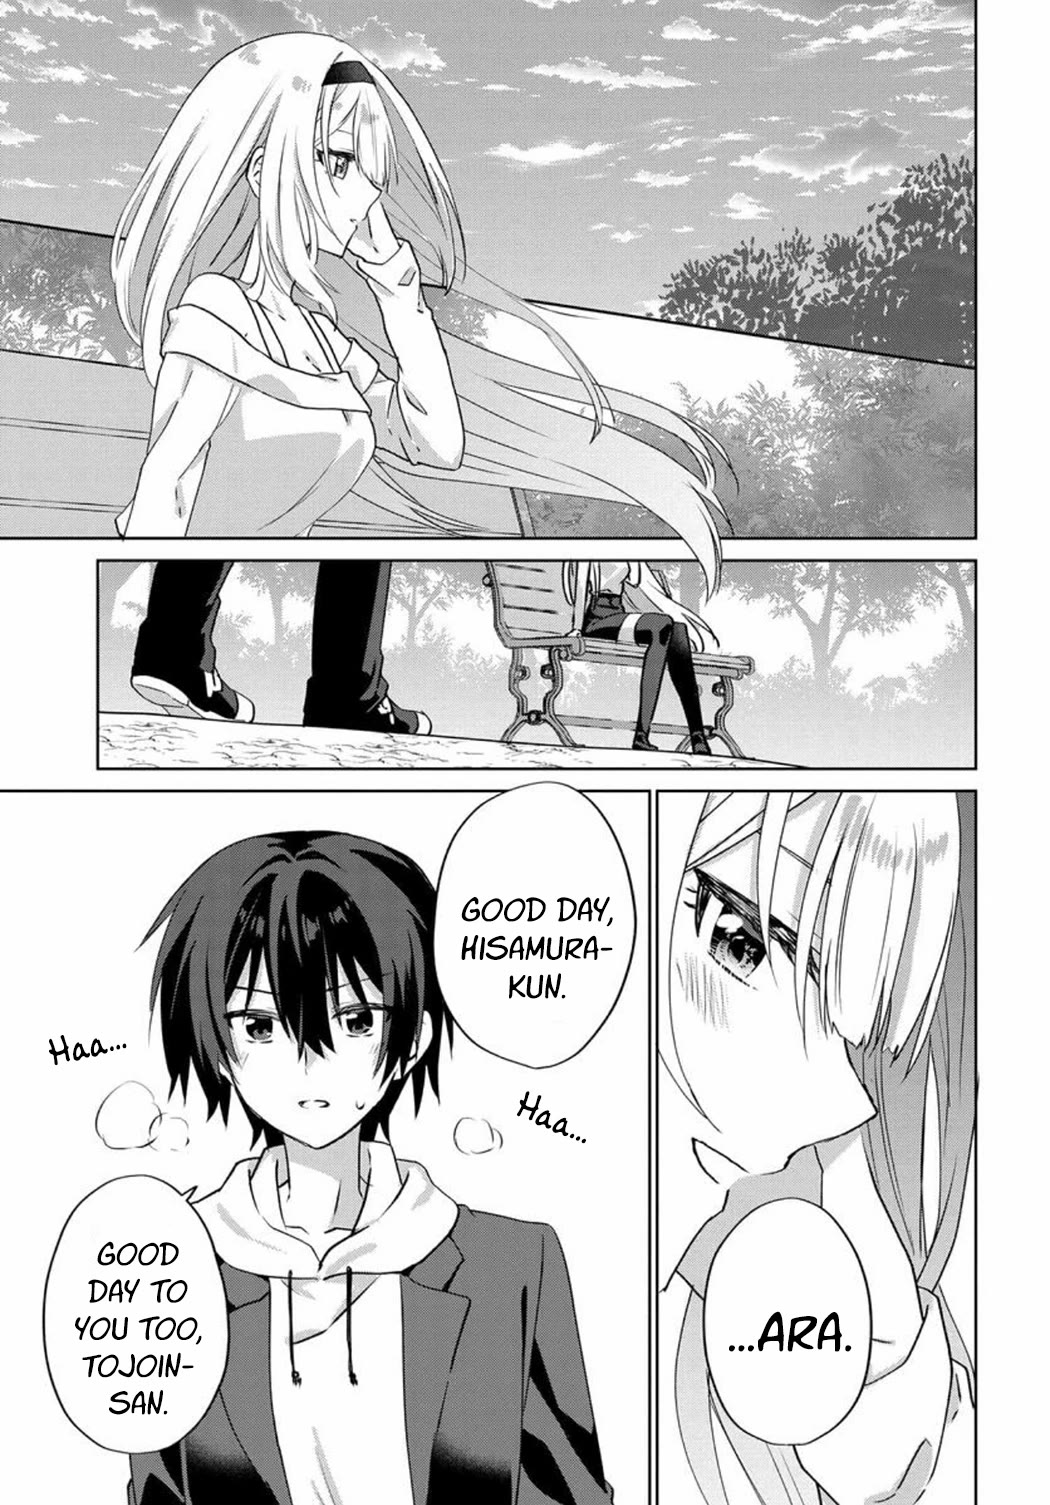 Since I’Ve Entered The World Of Romantic Comedy Manga, I’Ll Do My Best To Make The Losing Heroine Happy - chapter 8 - #5